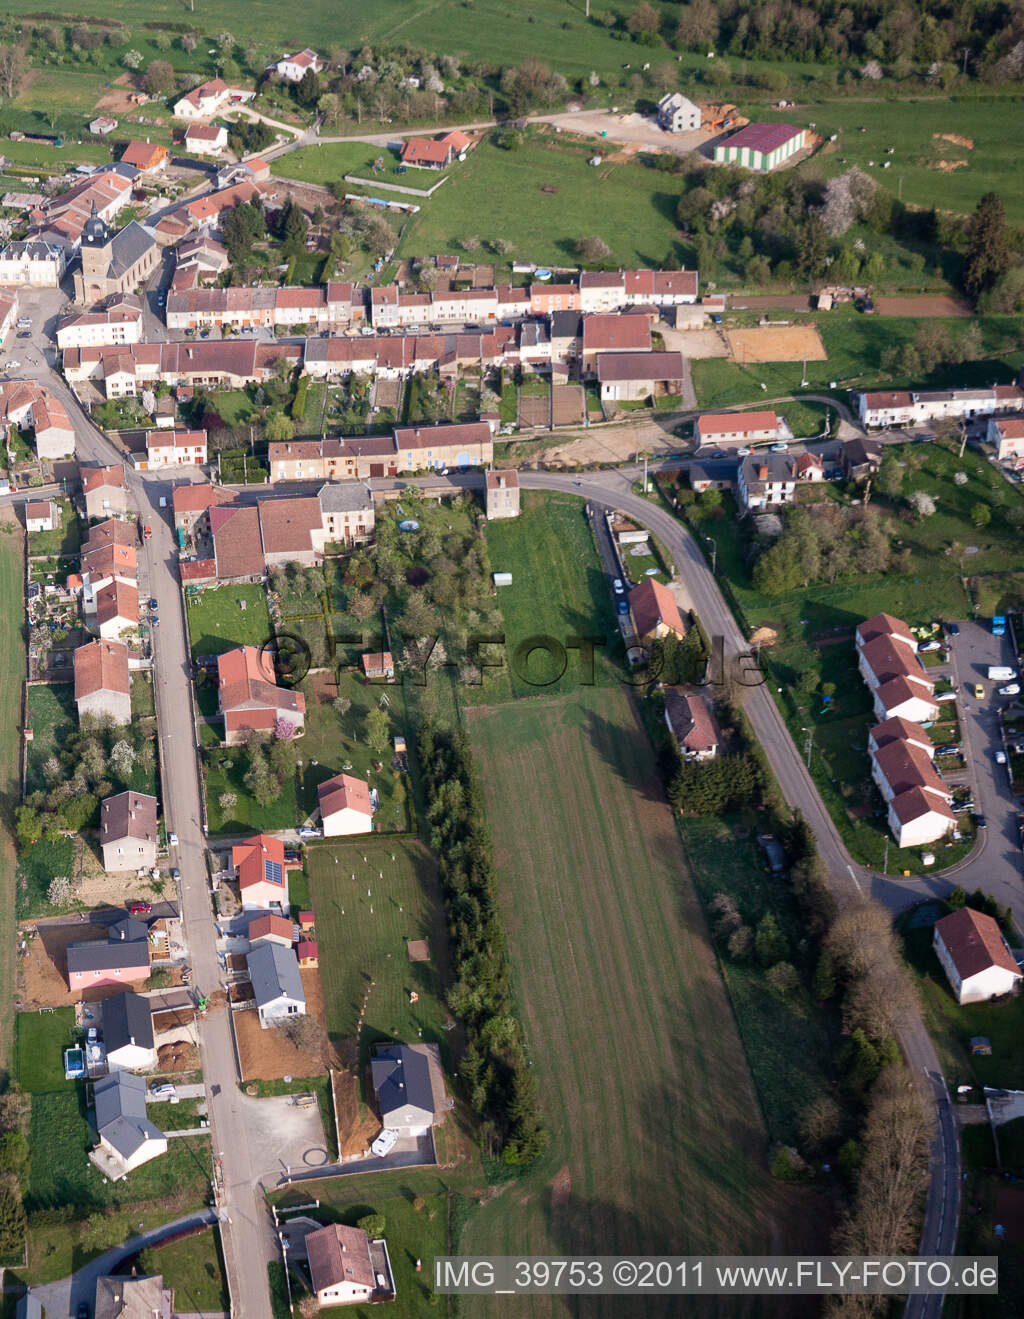 Aerial photograpy of Village - view on the edge of agricultural fields and farmland in Charency-Vezin in Grand Est, France